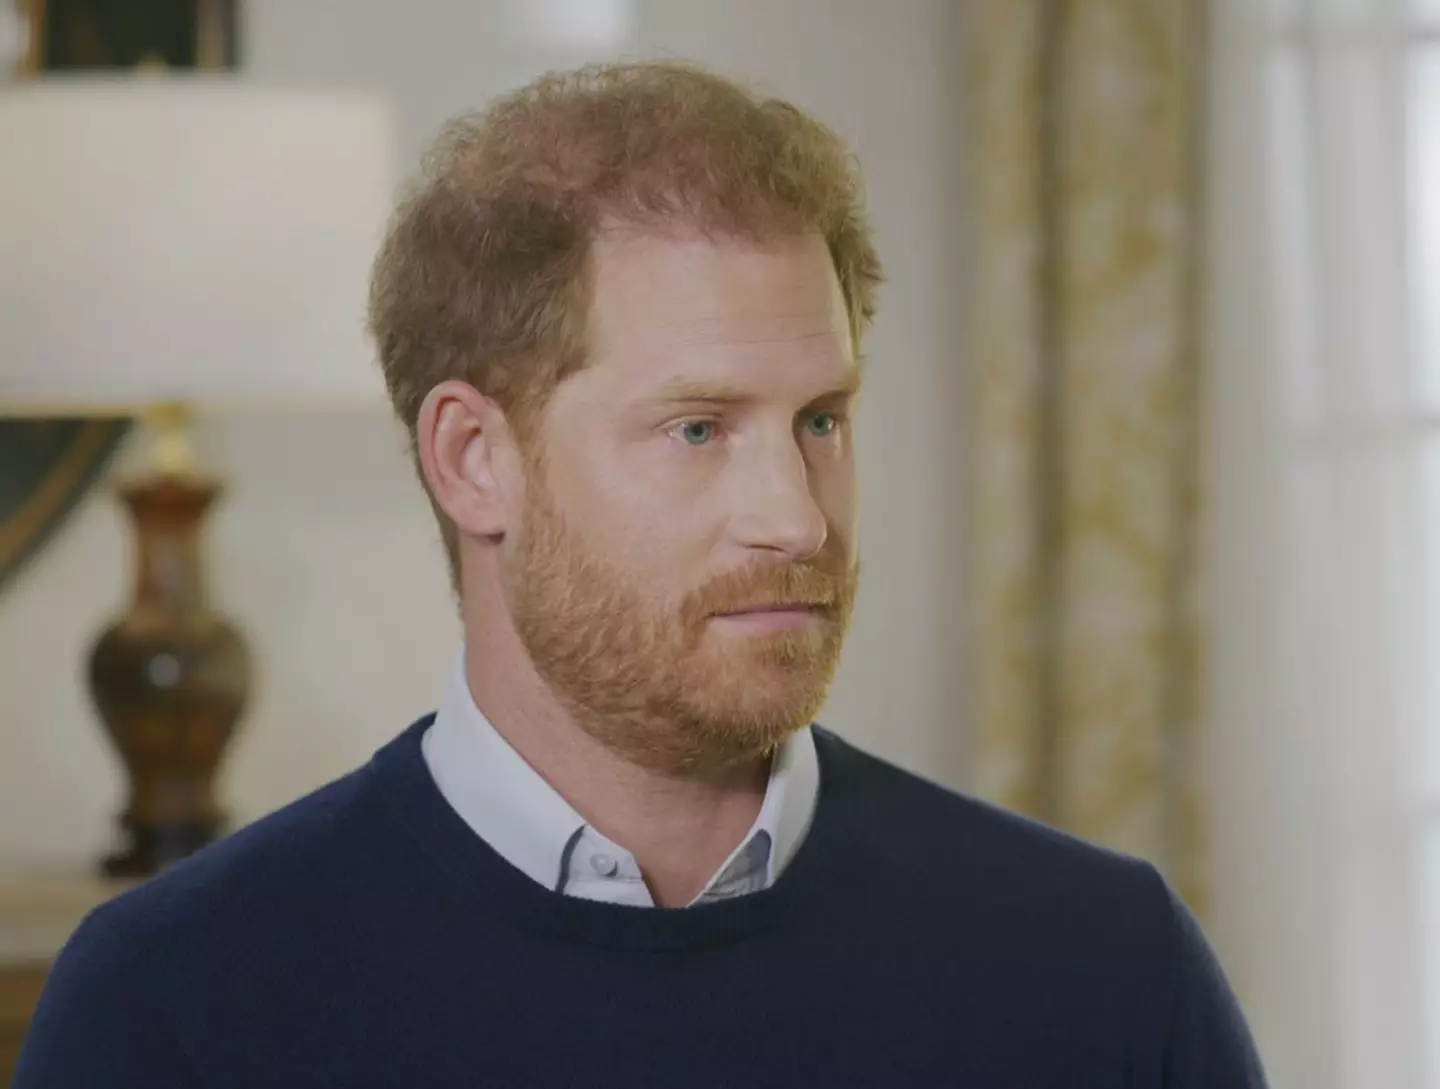 Prince Harry says he has done mushrooms in Courteney Cox's house..